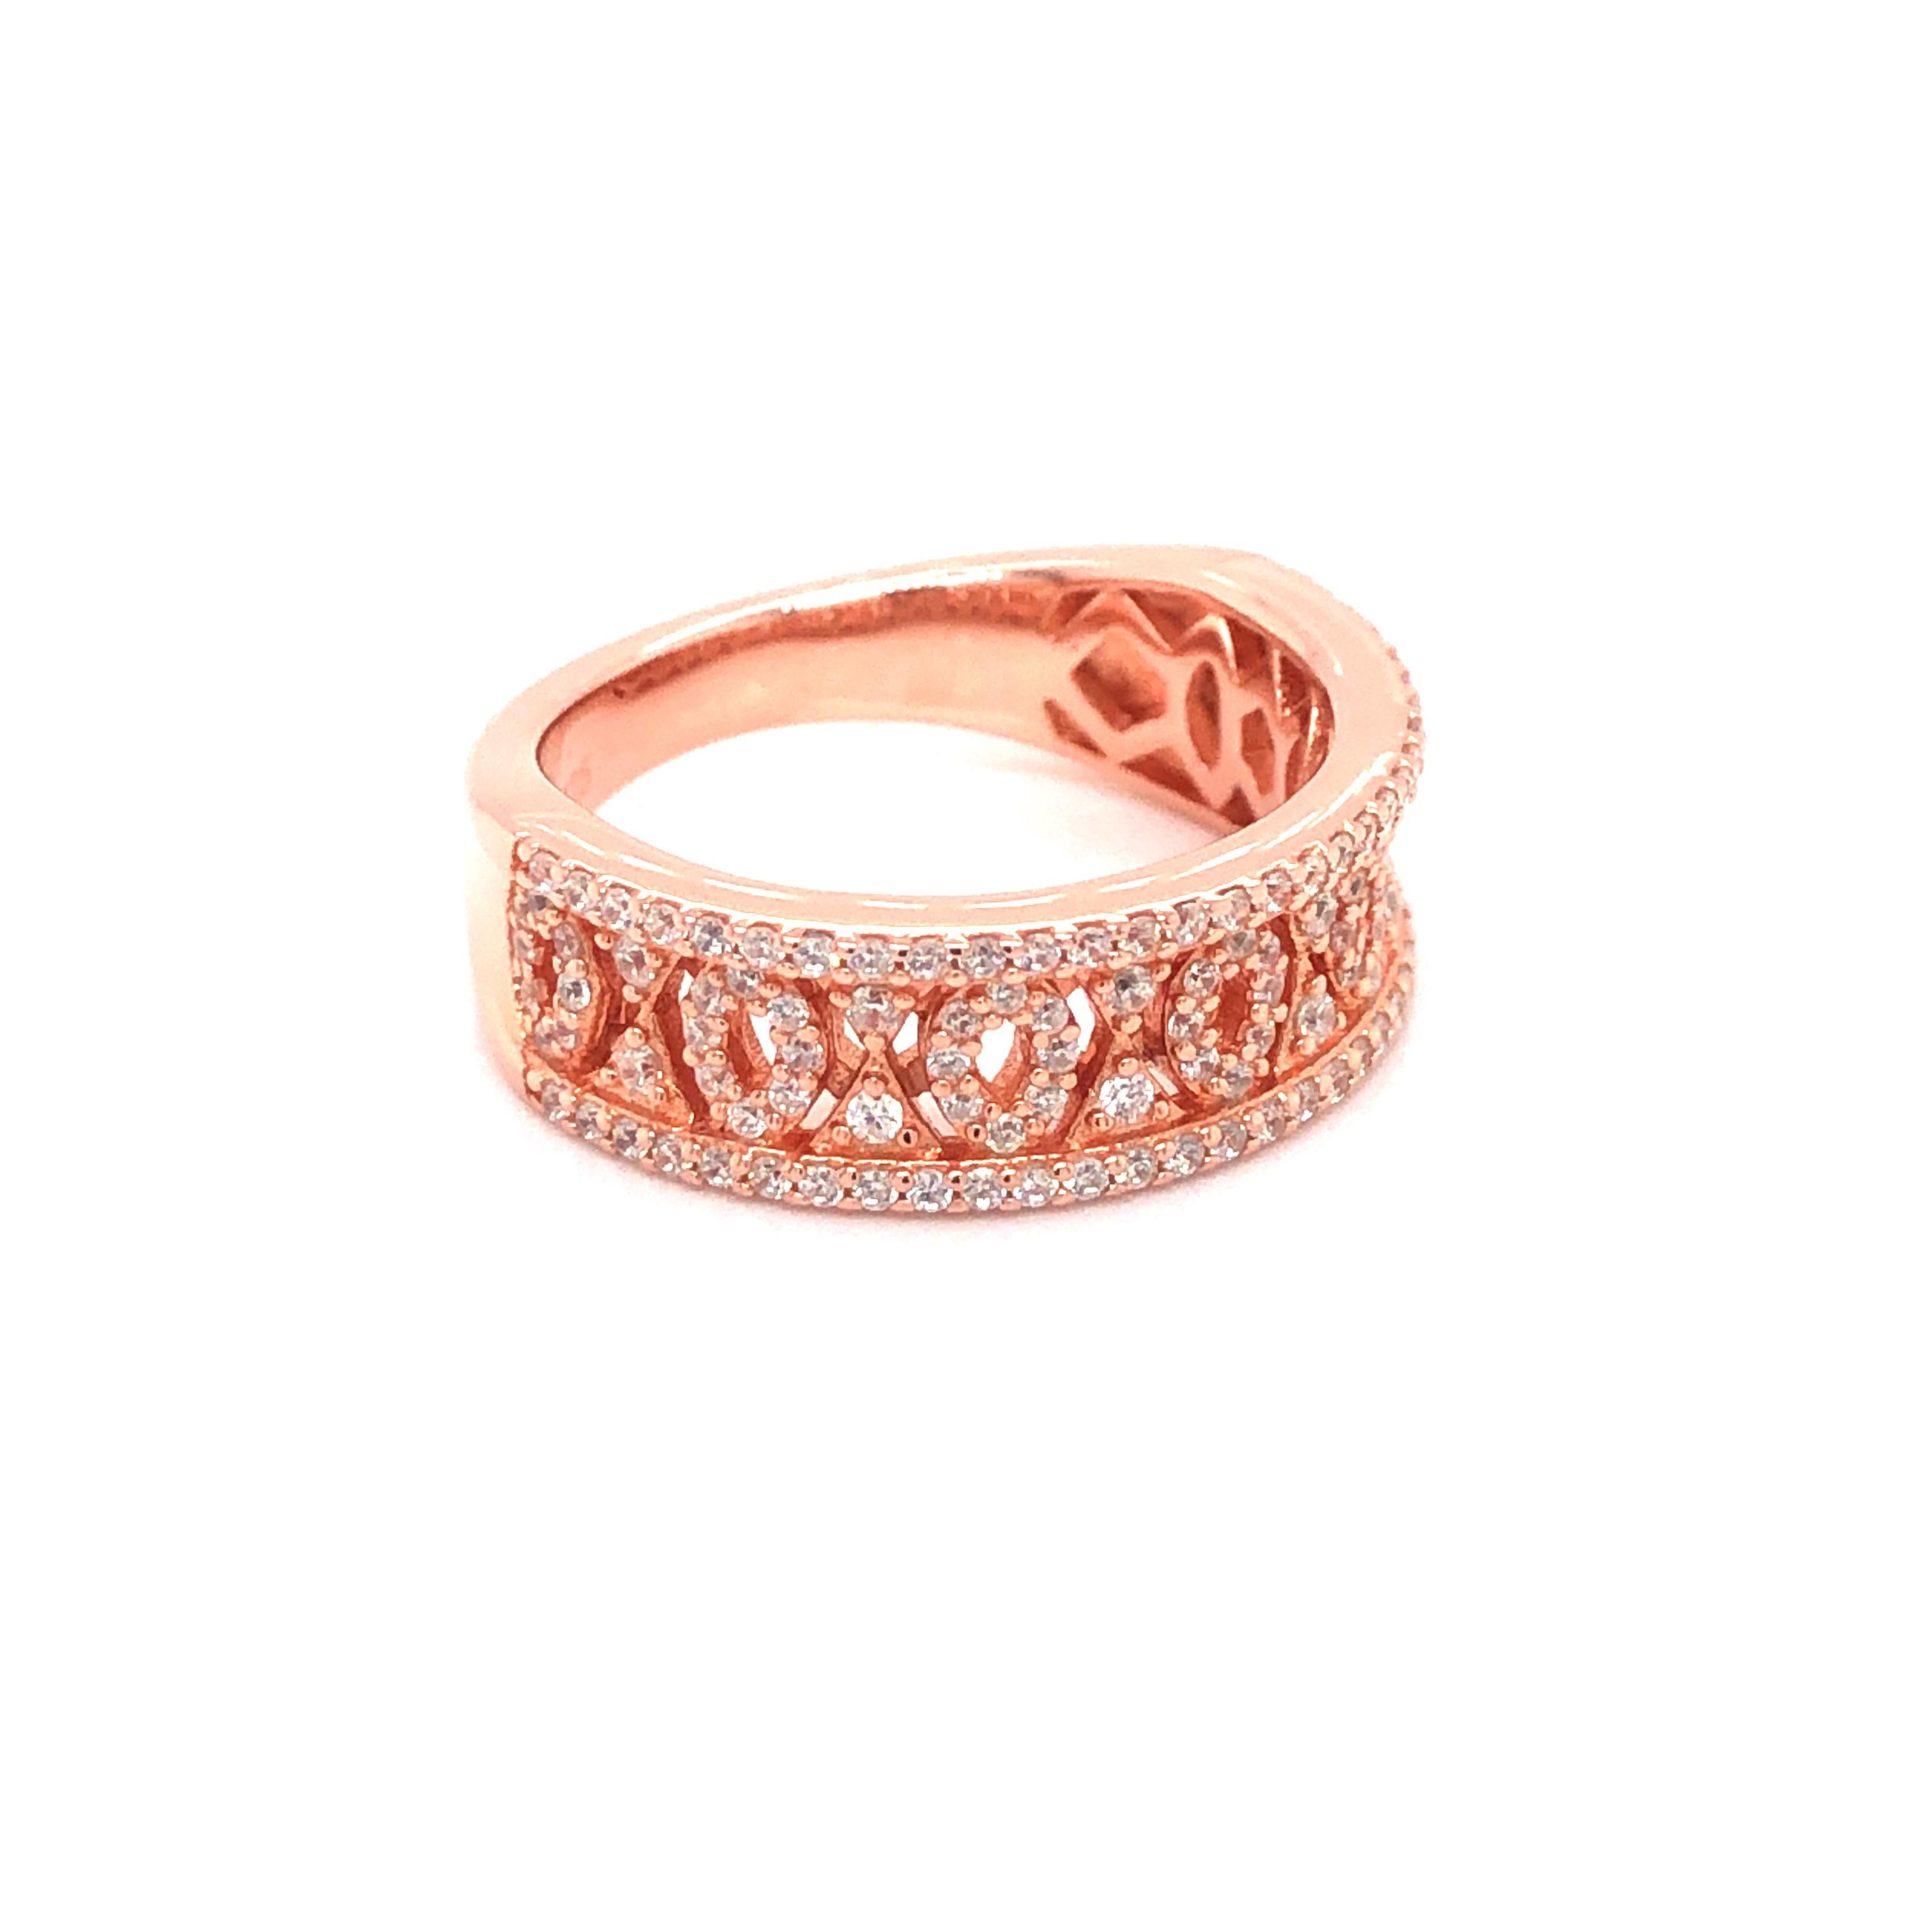 Art Deco 1.07 Carat Cubic Zirconia Rose Gold Plated Half Filigree Wedding Band Ring For Sale